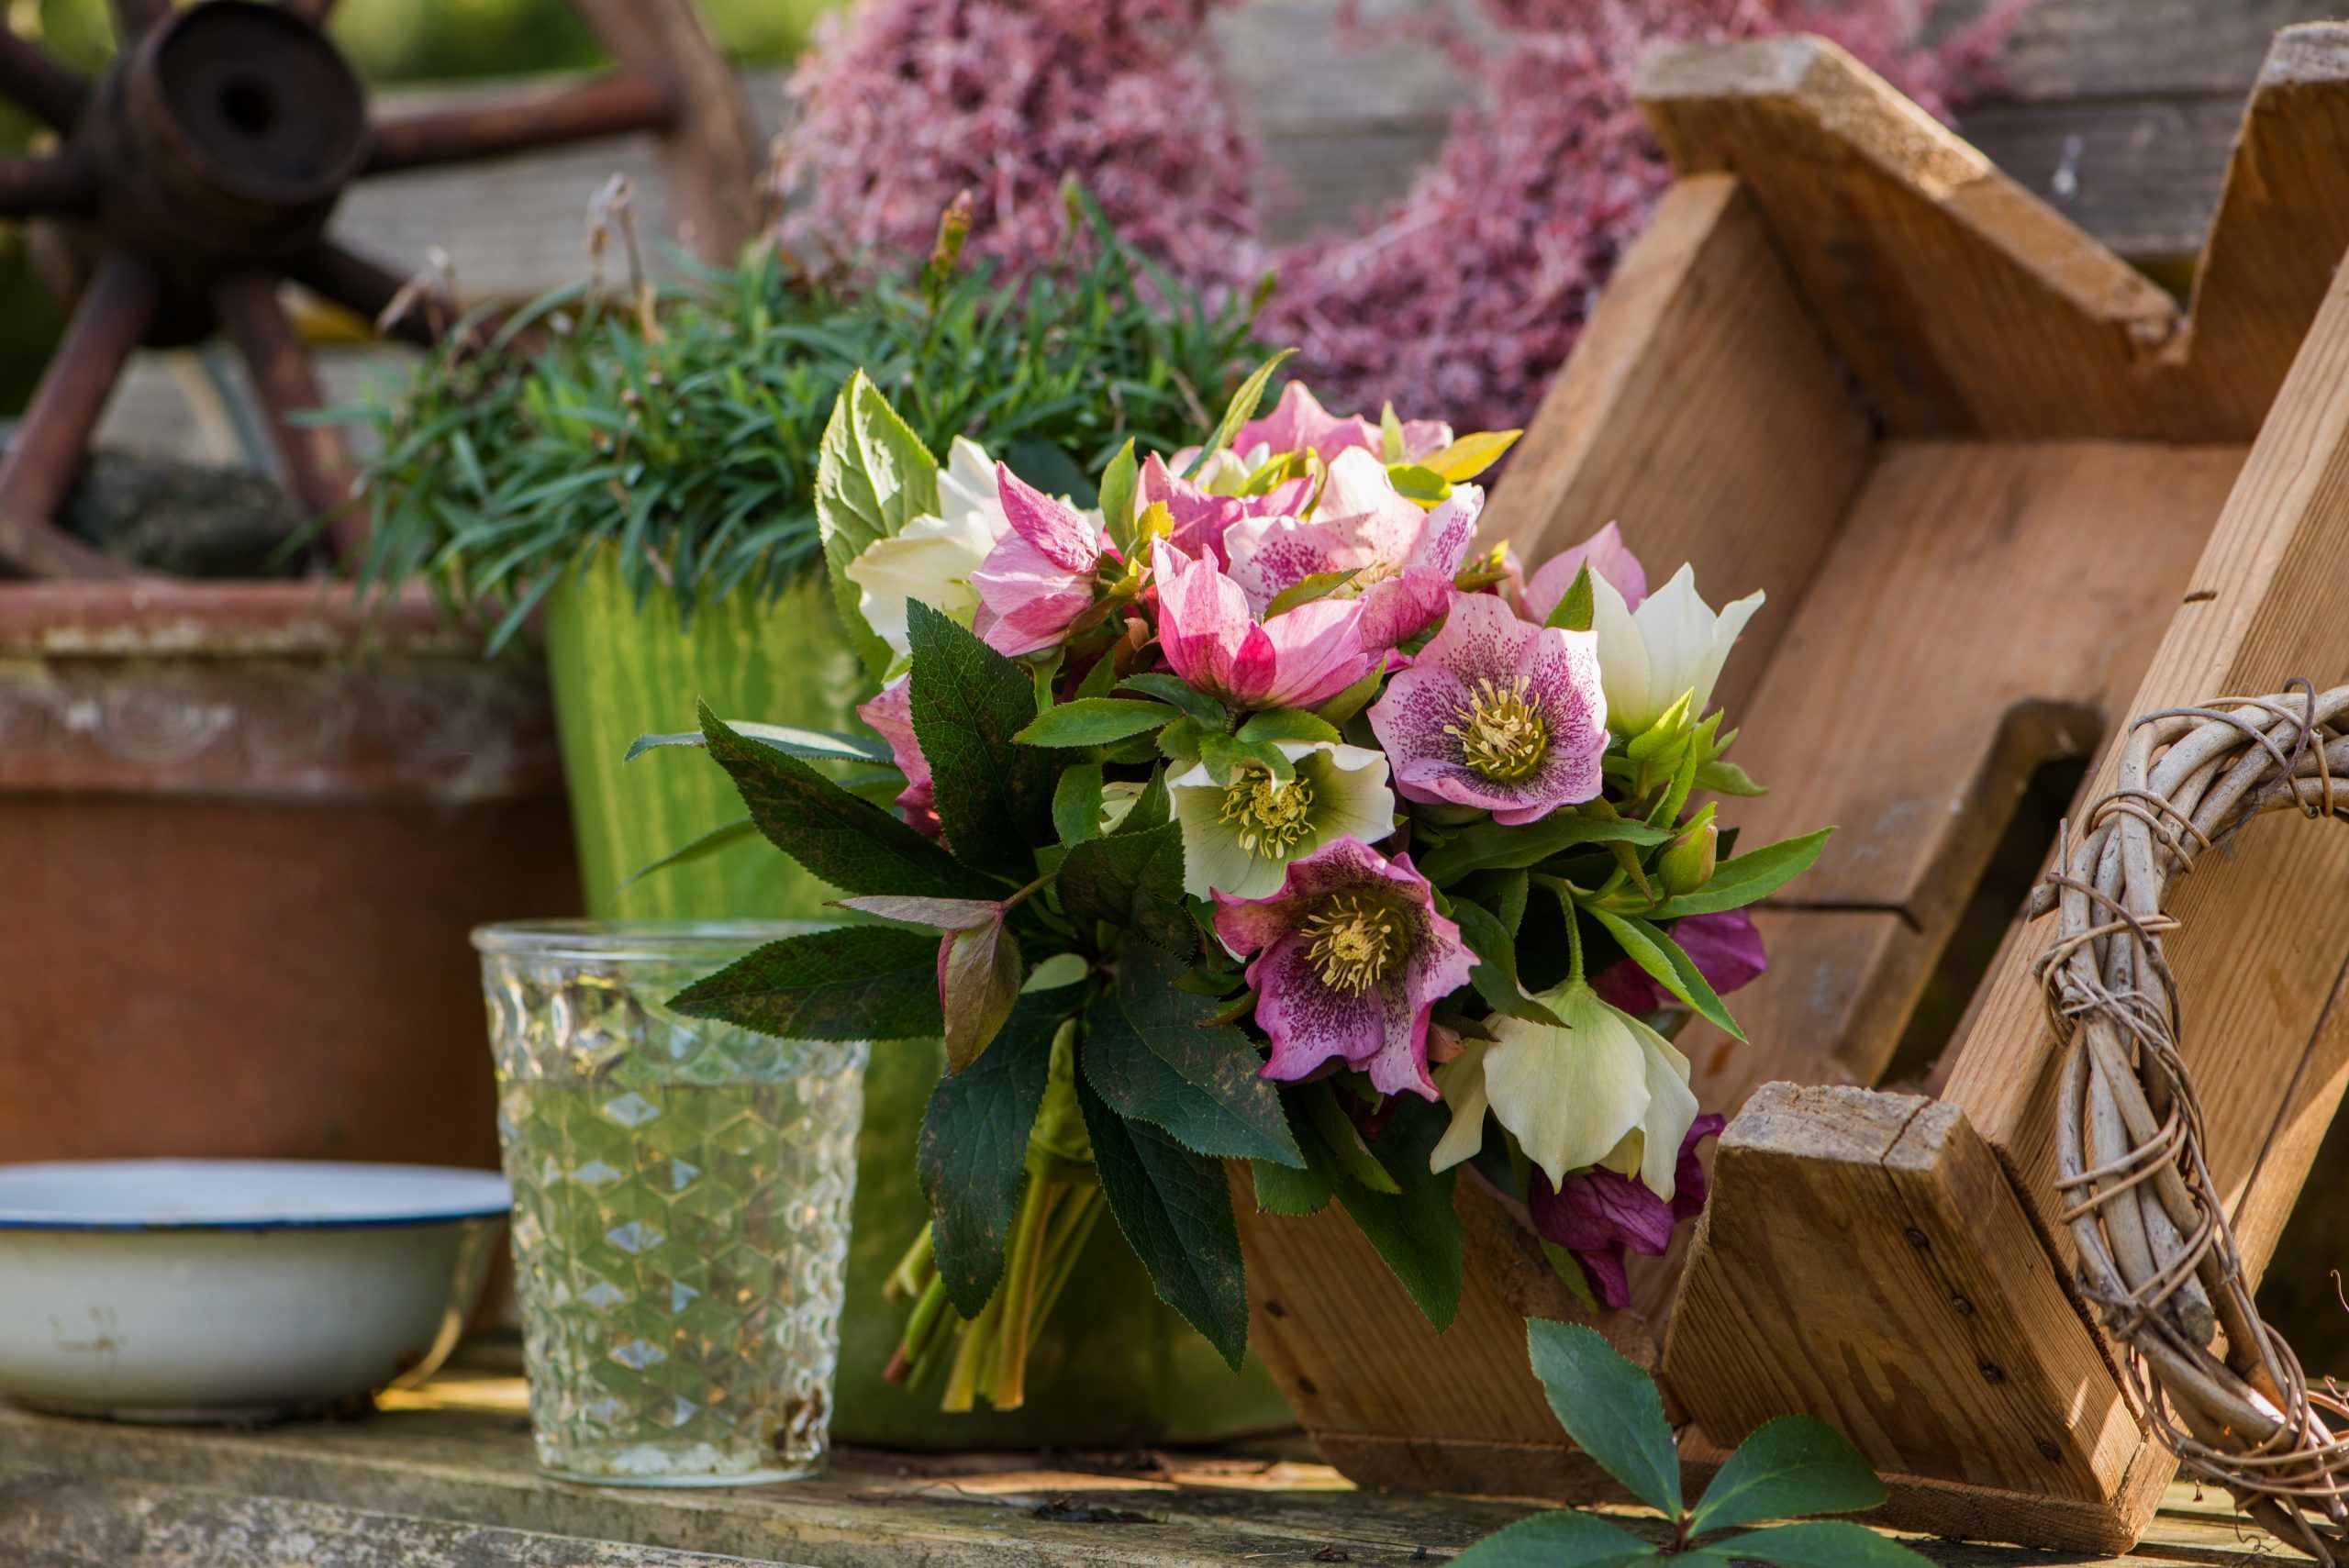 Colorful helleborus flower bouquet in a wooden box